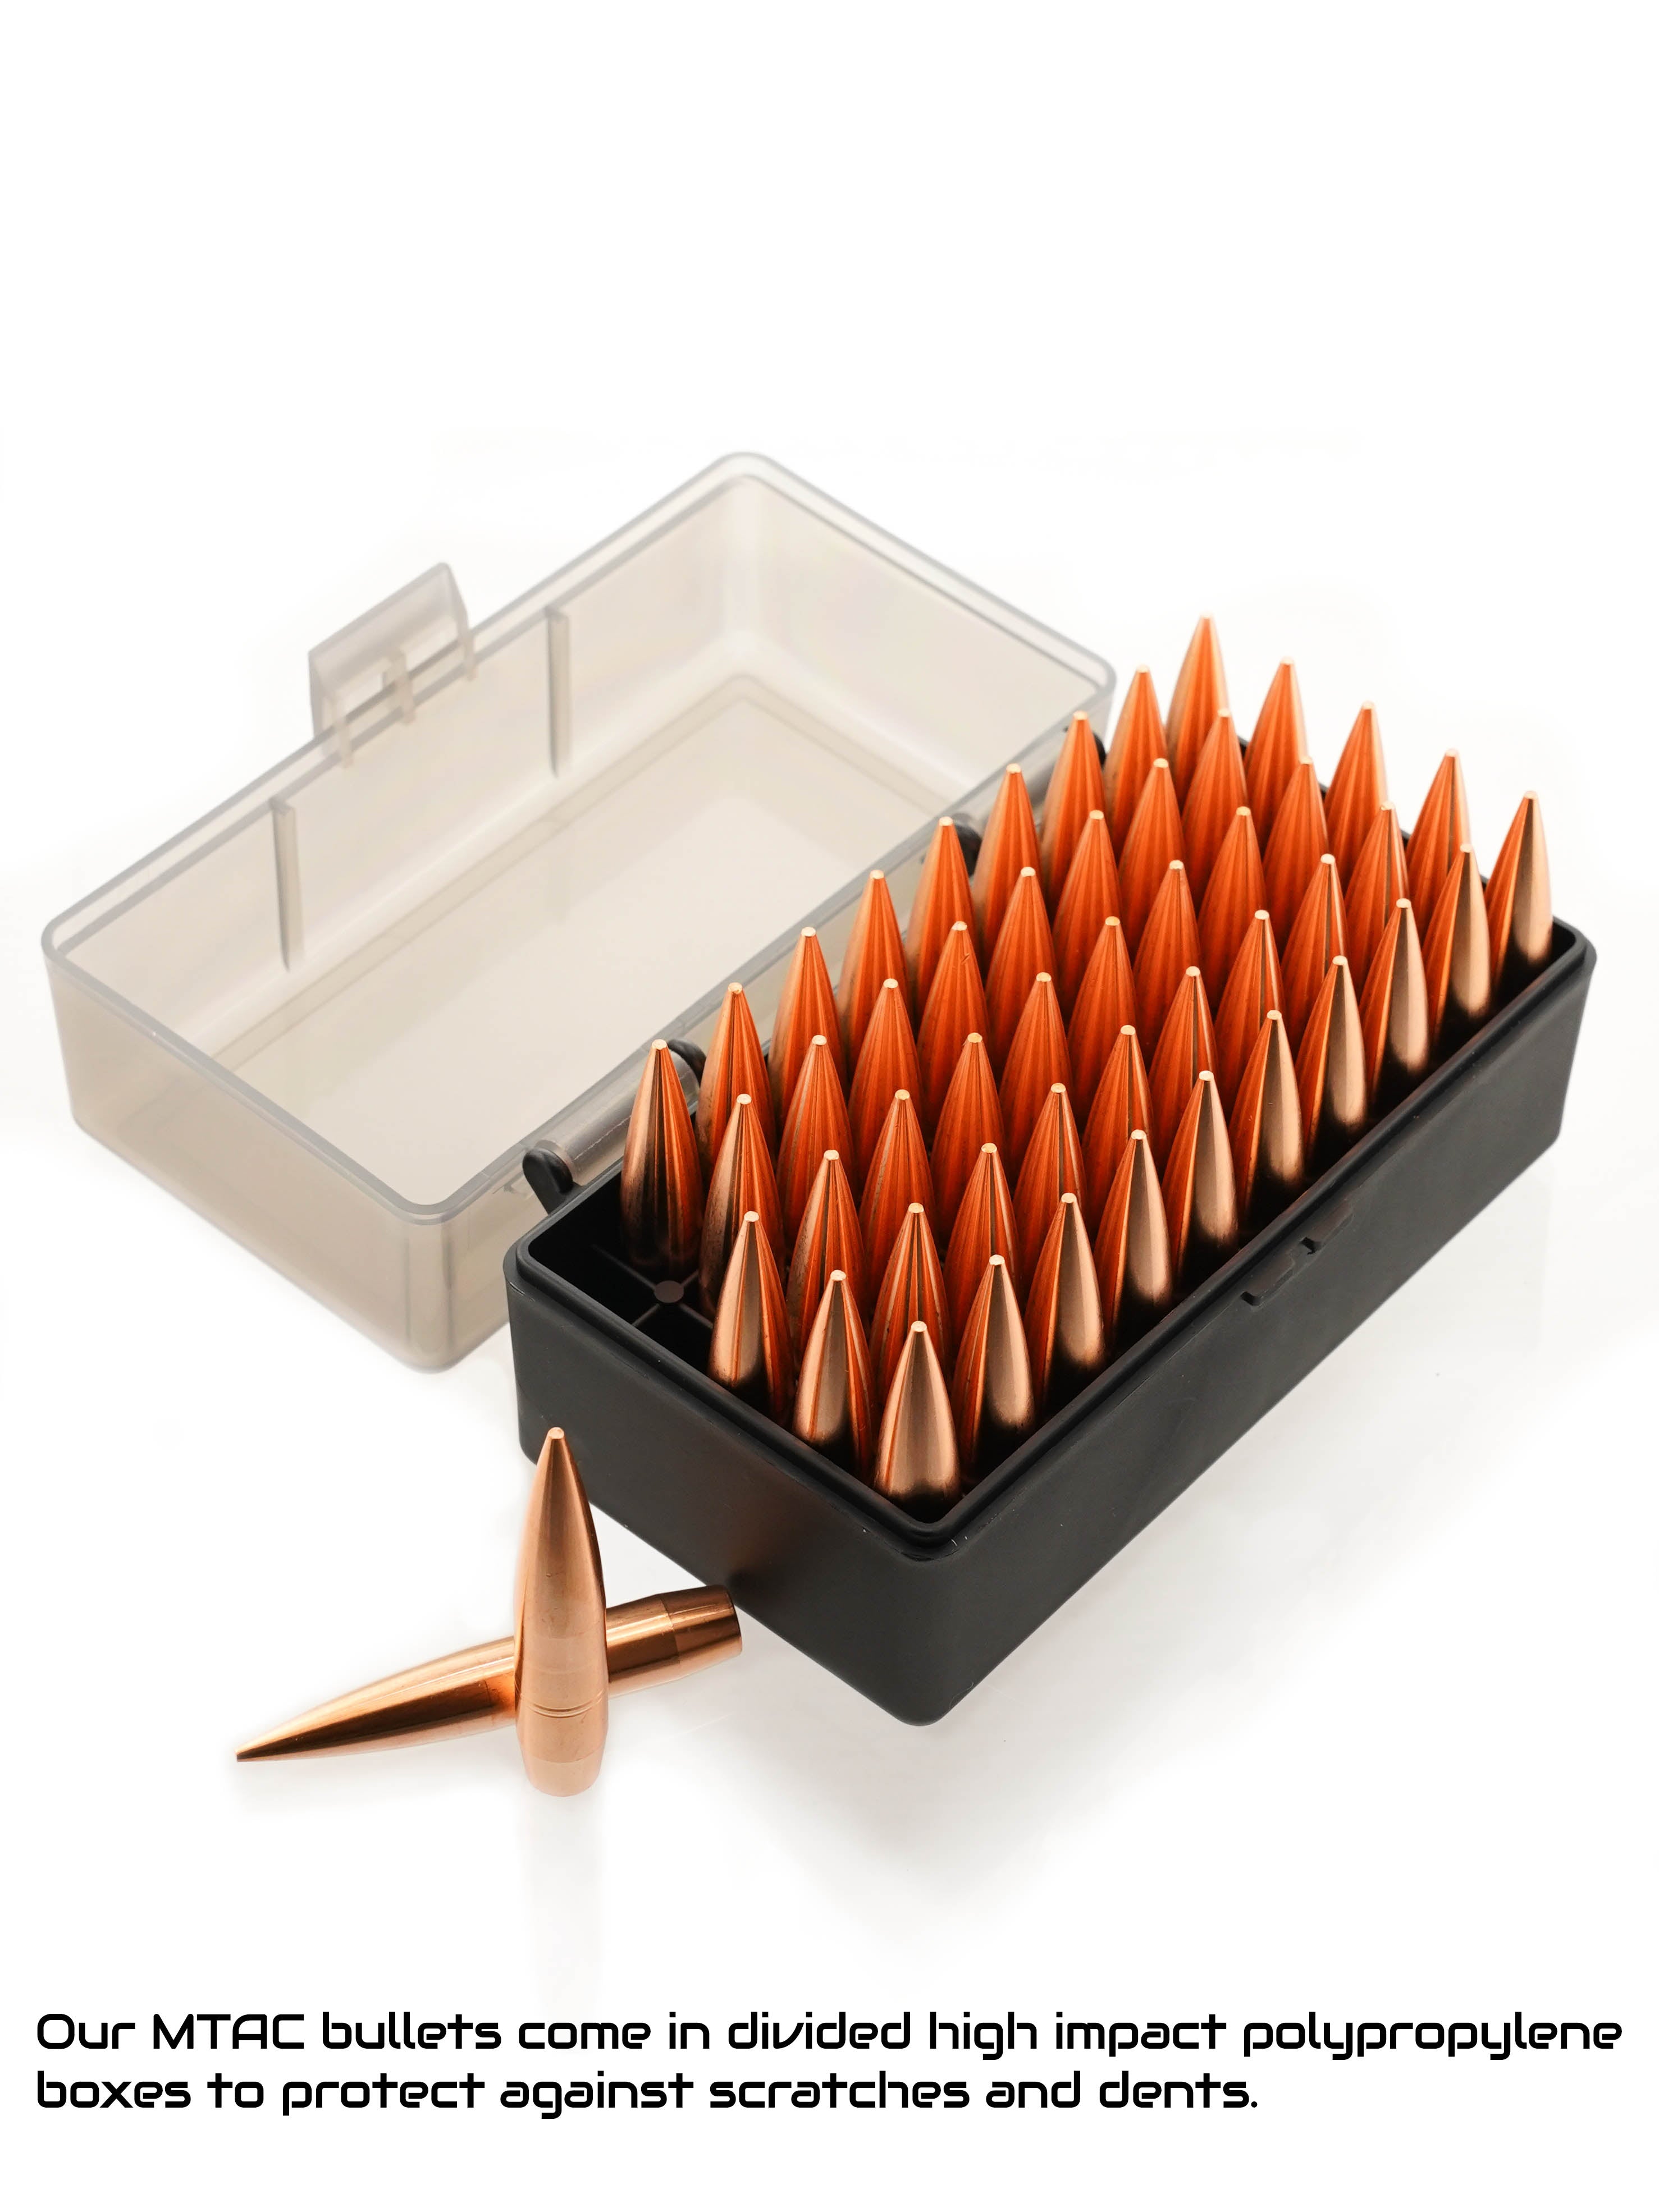 .264/6.5mm 143gr SINGLE FEED MTAC (Match/Tactical) - 50ct